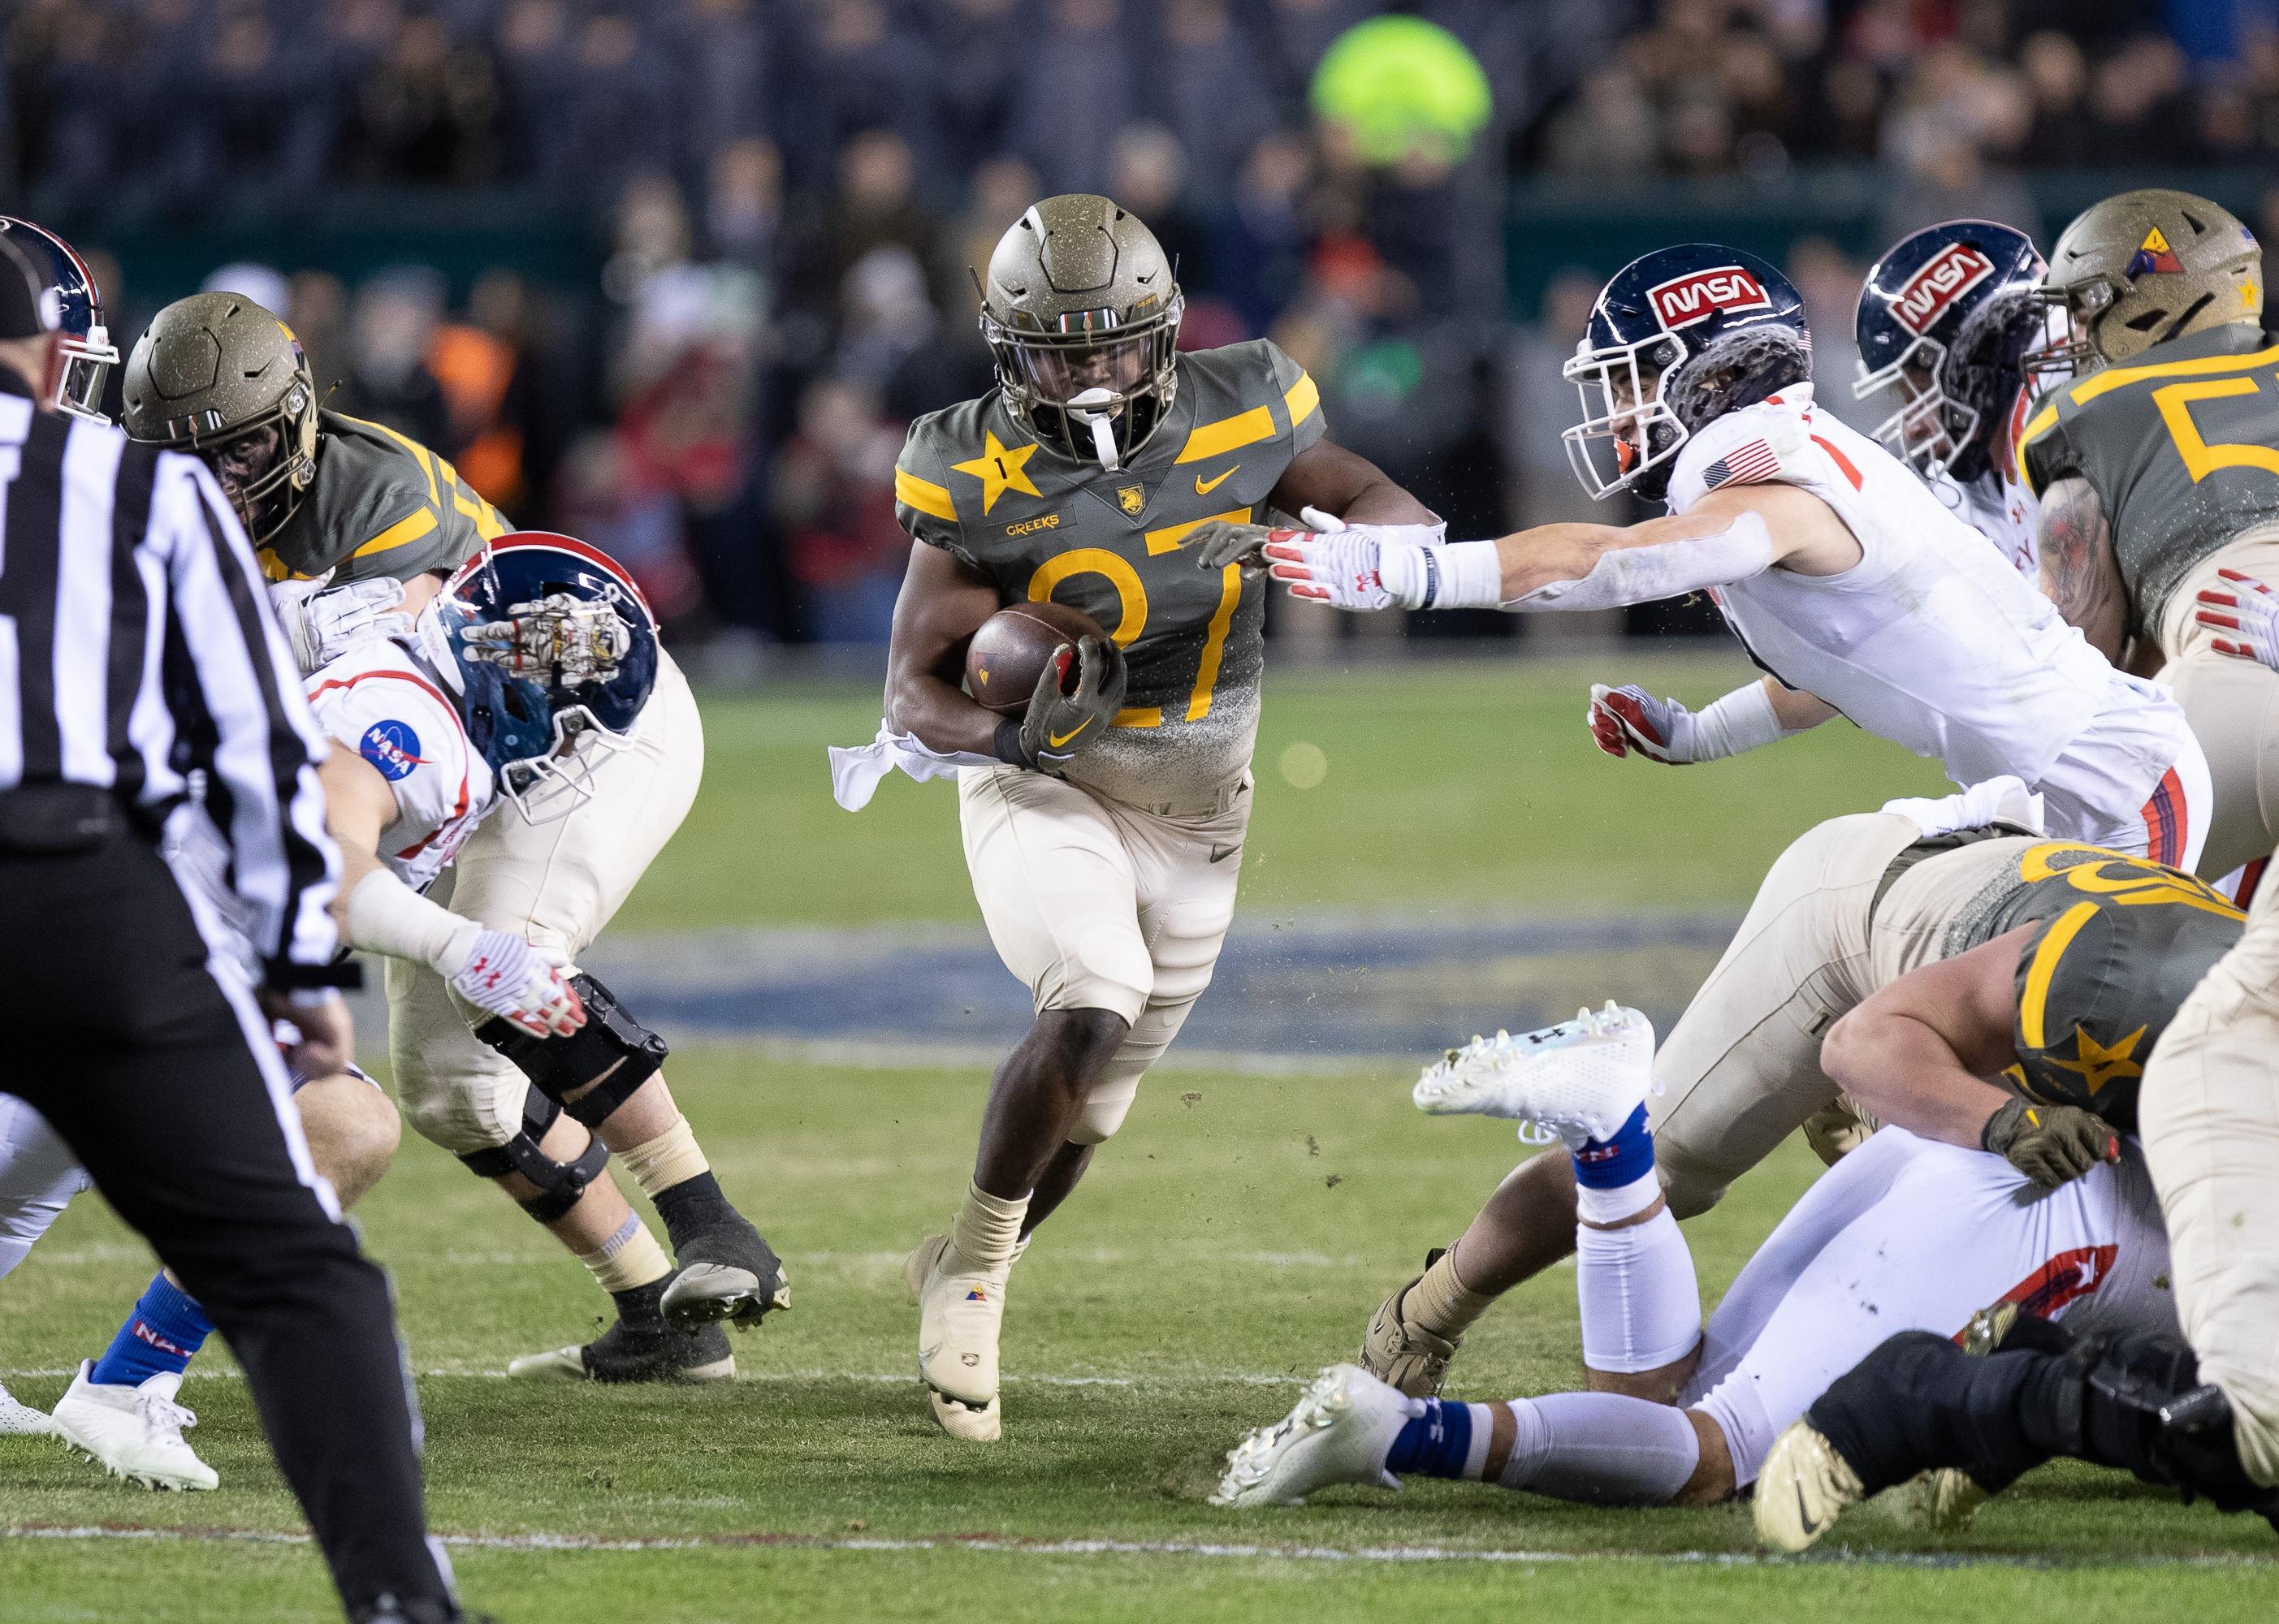 Markel Johnson of the Army Black Knights runs for a touchdown against the Navy Midshipmen.